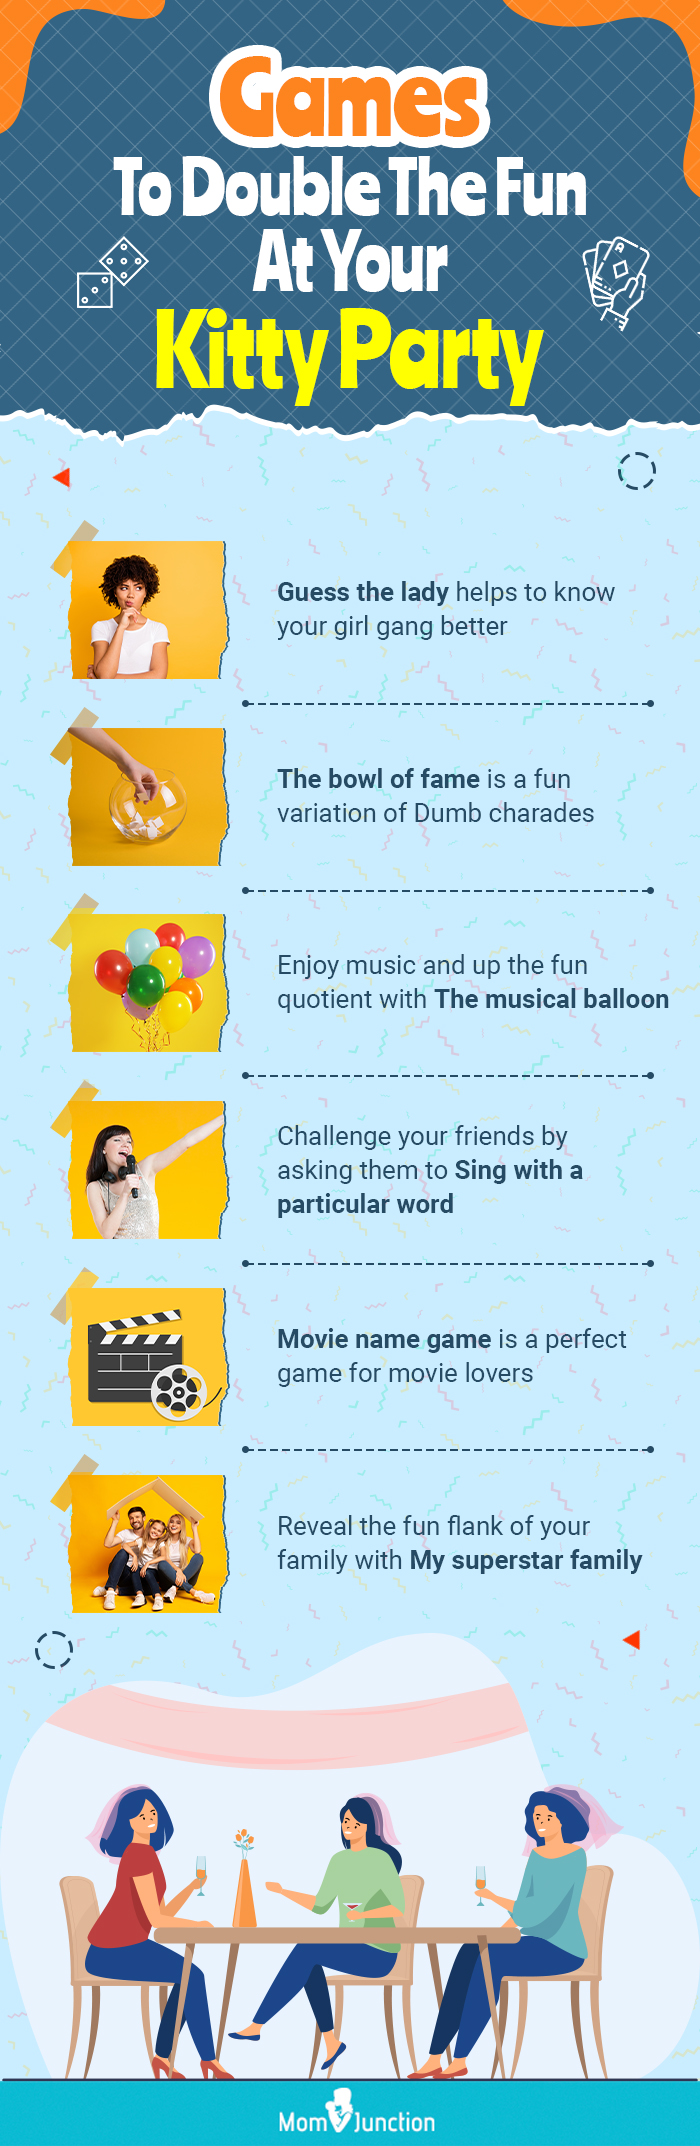 games to double the fun at your kitty party (infographic)